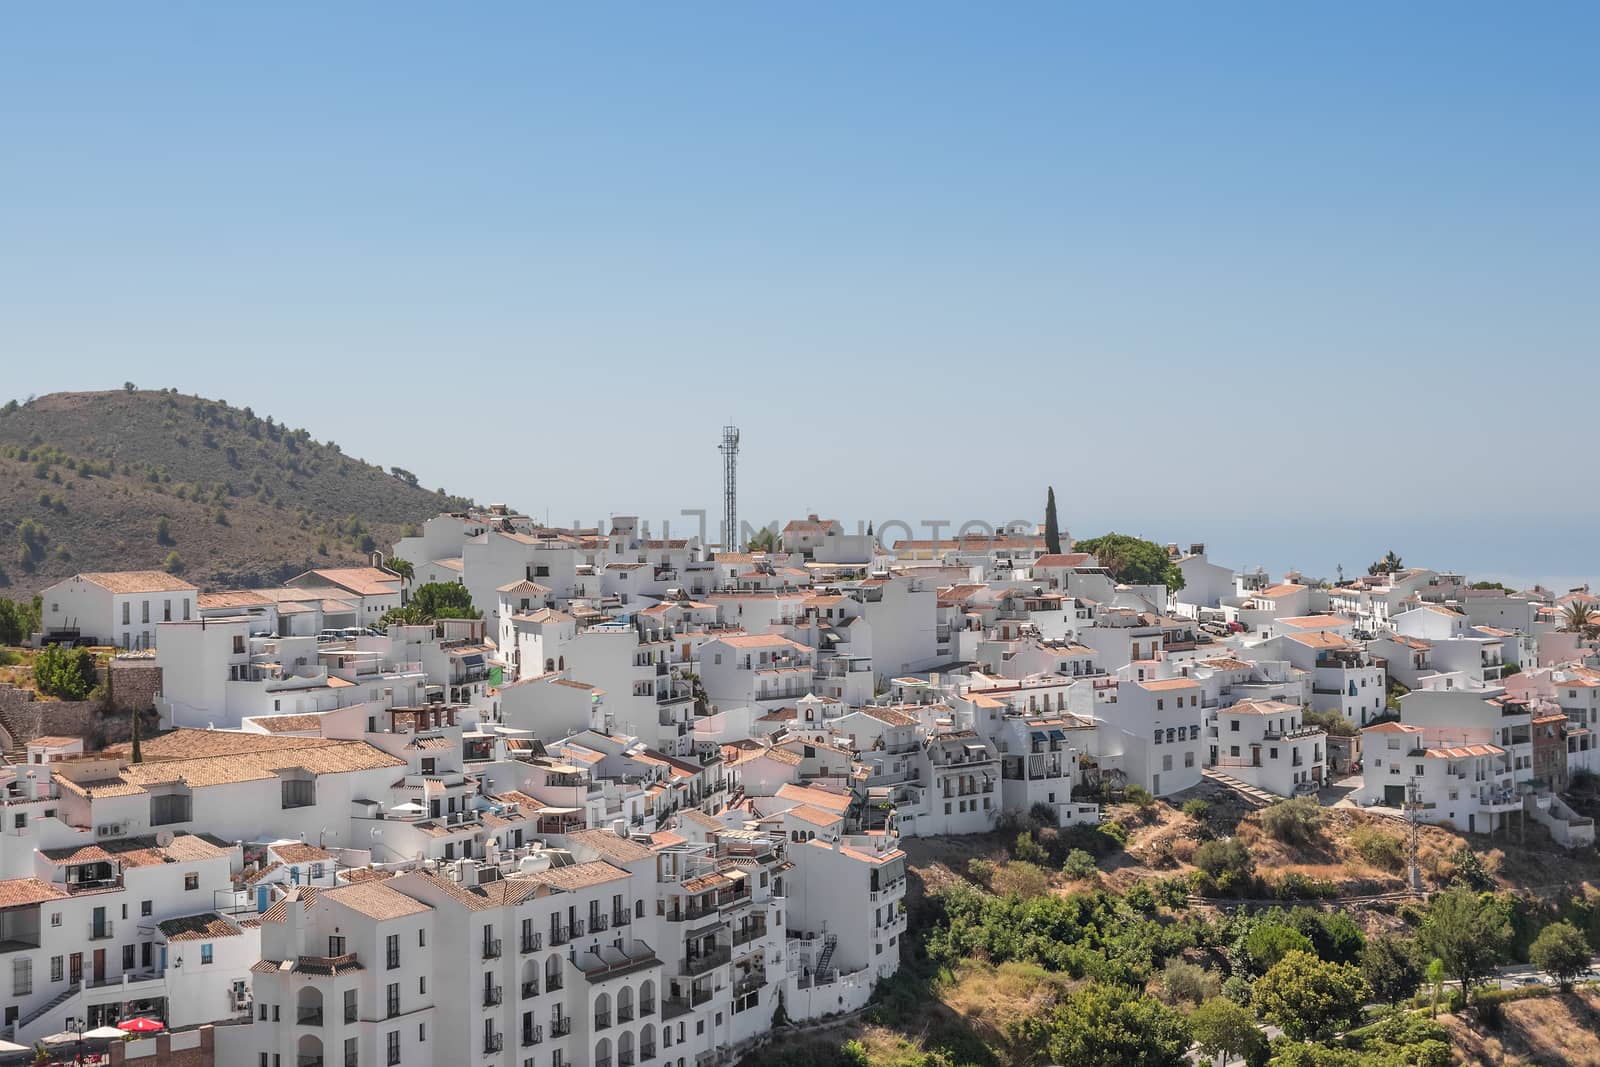 View over the town of Frigiliana. Andalusia, Spain.